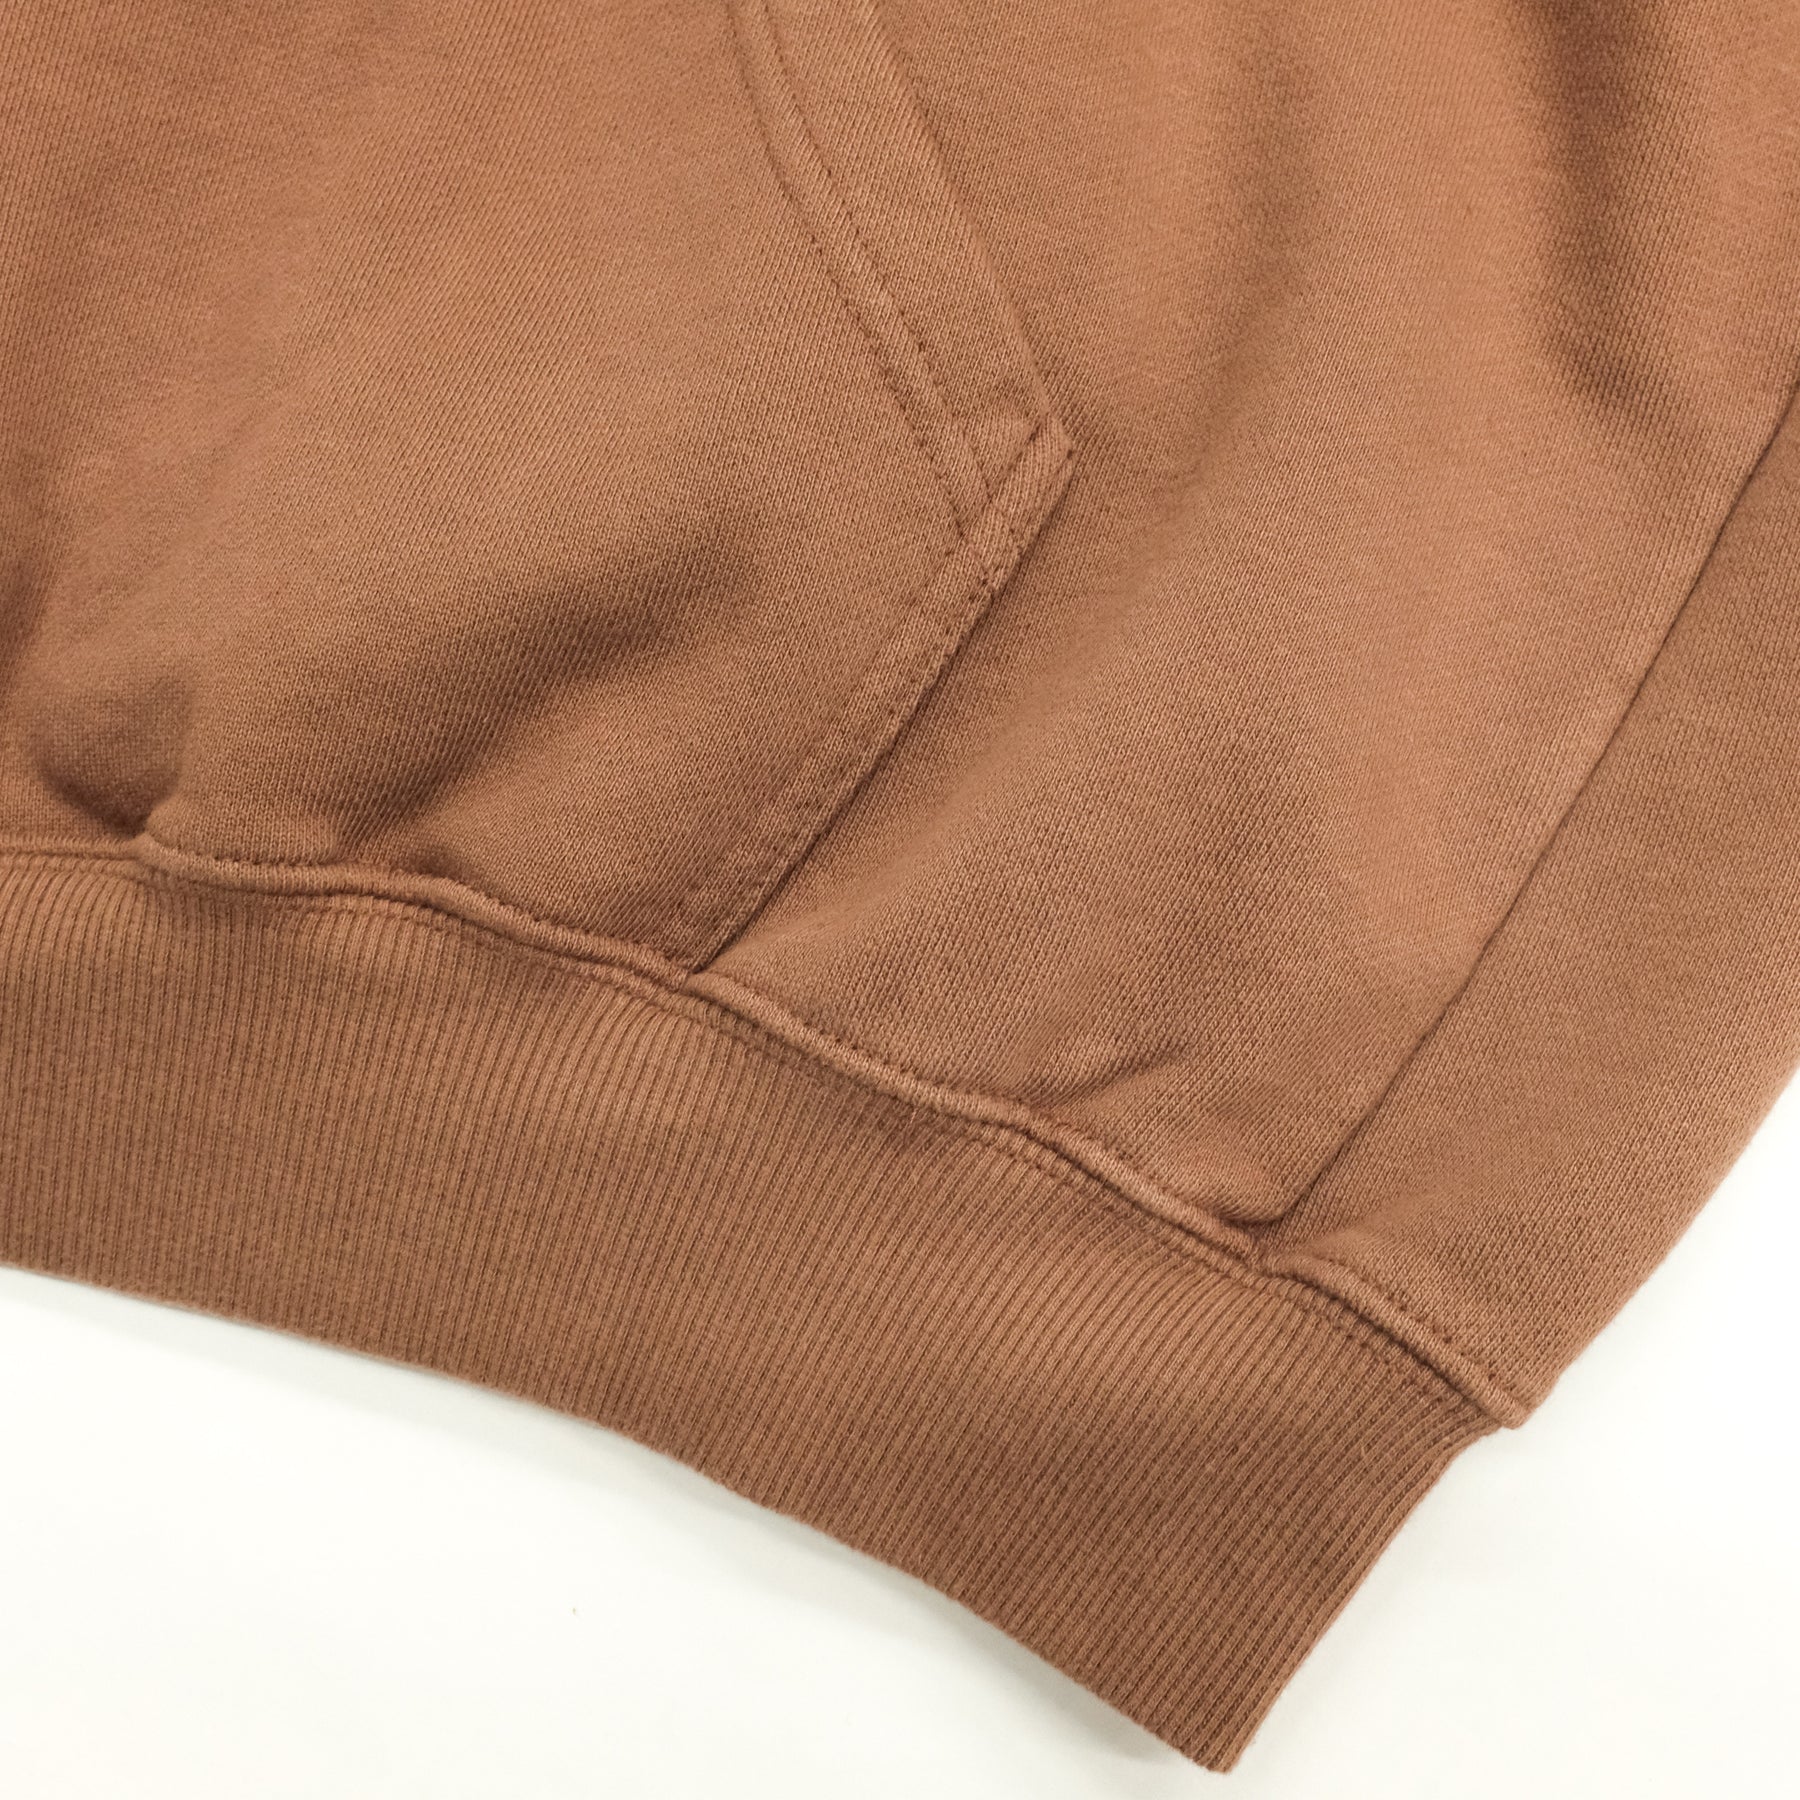 <span style="color: #f50b0b;">Last One</span> ARNOLD PARK STUDIOS / OIL AND FREIGHT LOGO HOODIE FADED BROWN